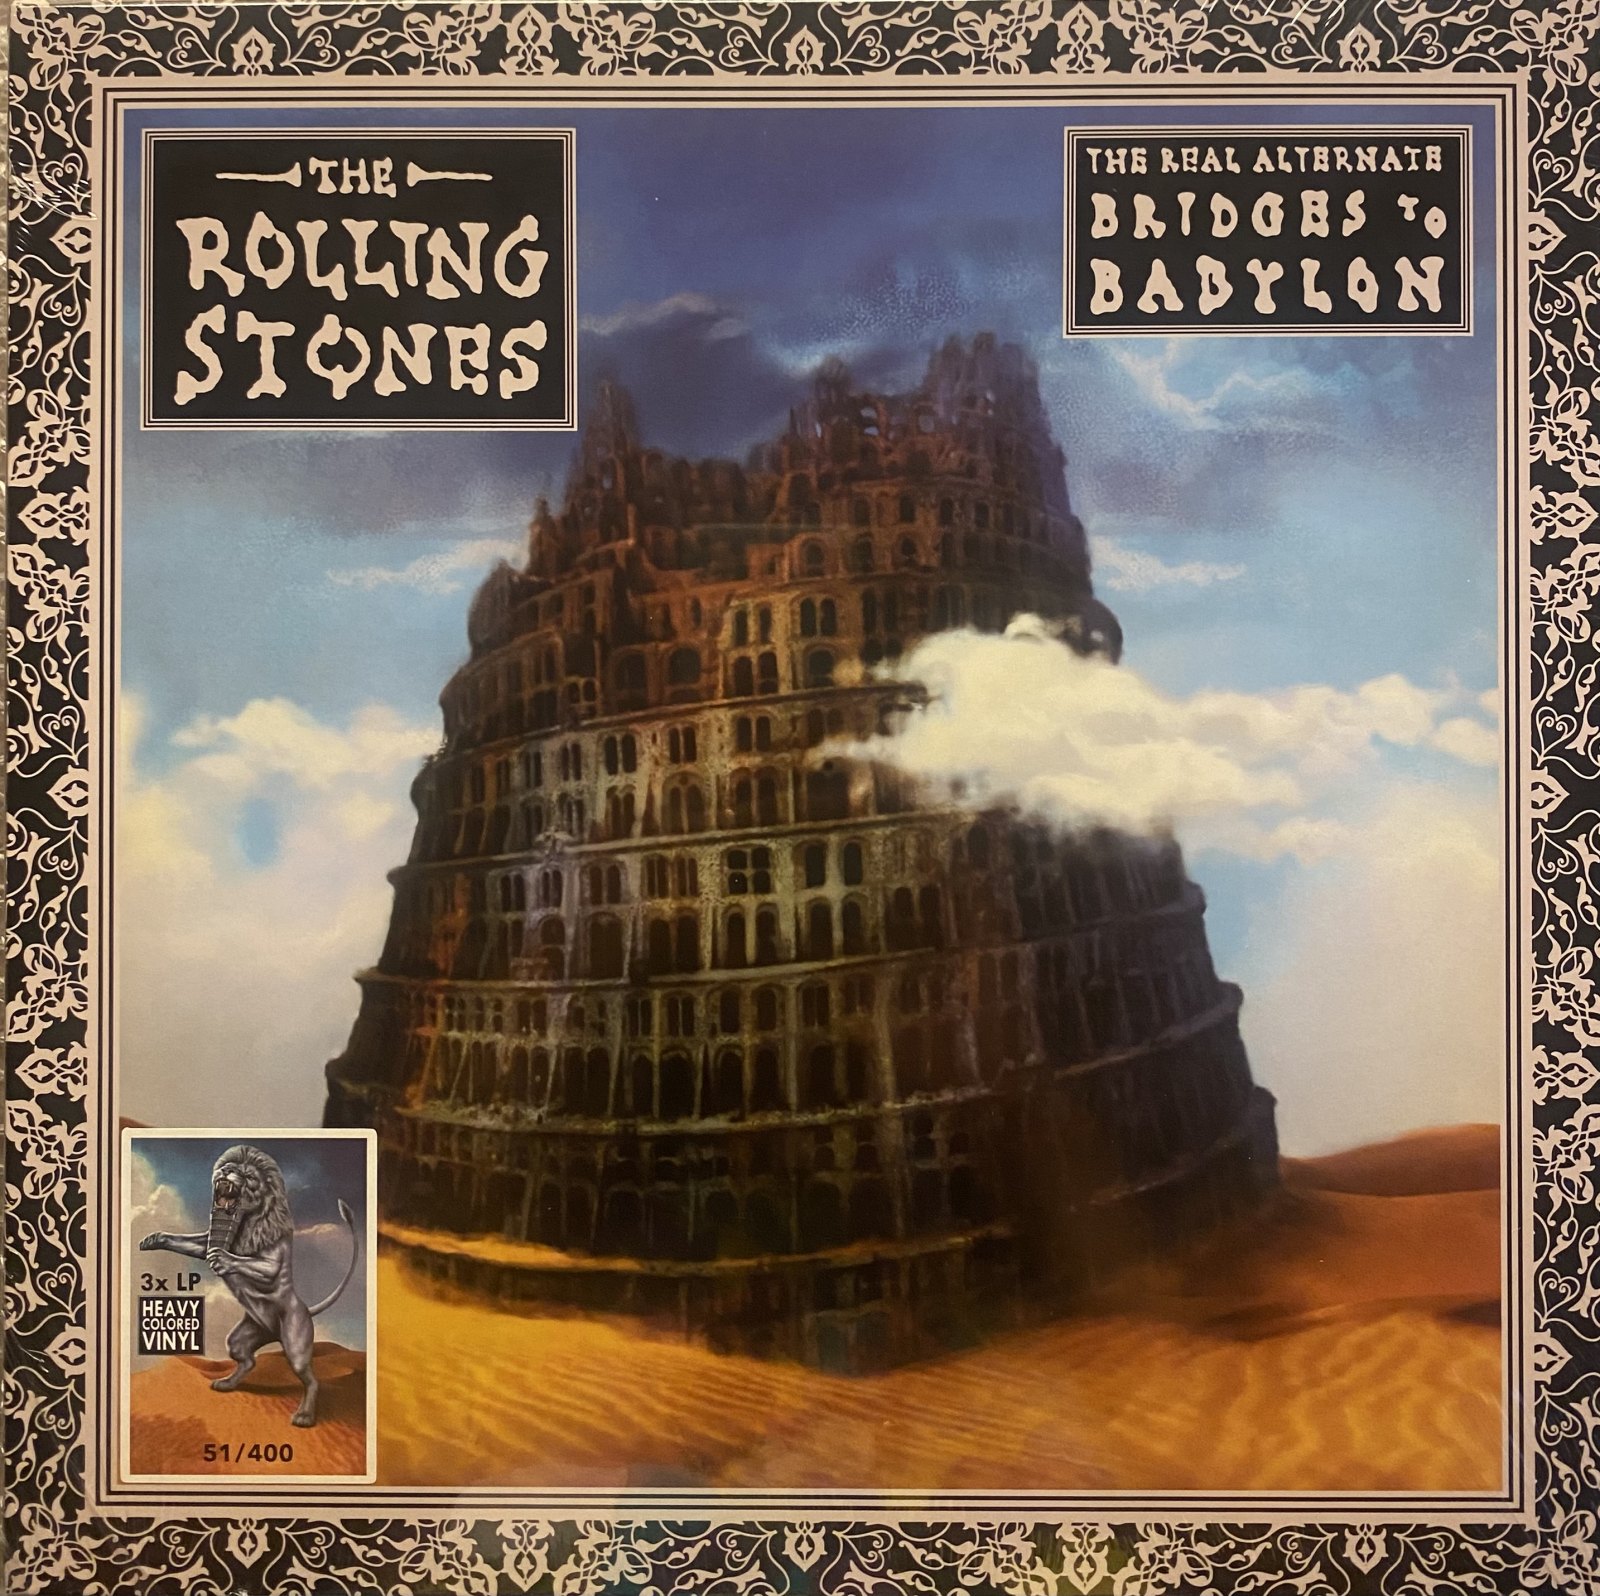 ROLLING STONES - REAL ALTERNATE BRIDGES TO BABYLON - LIMITED NUMBERED